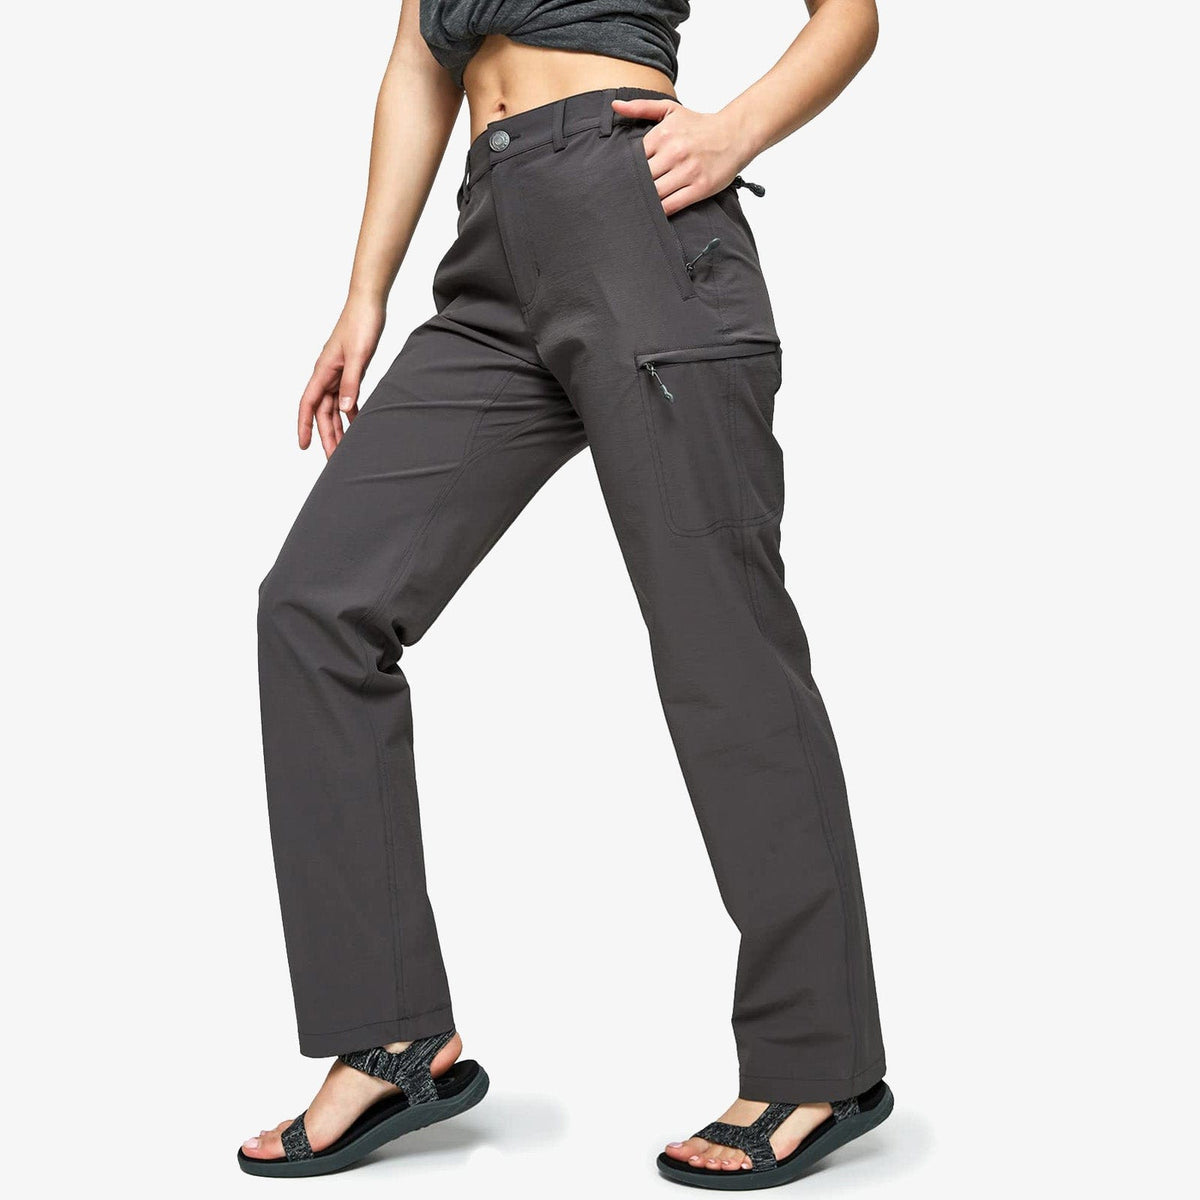 Pants & Jumpsuits, Womens Hiking Cargo Pants Quick Dry Outdoor